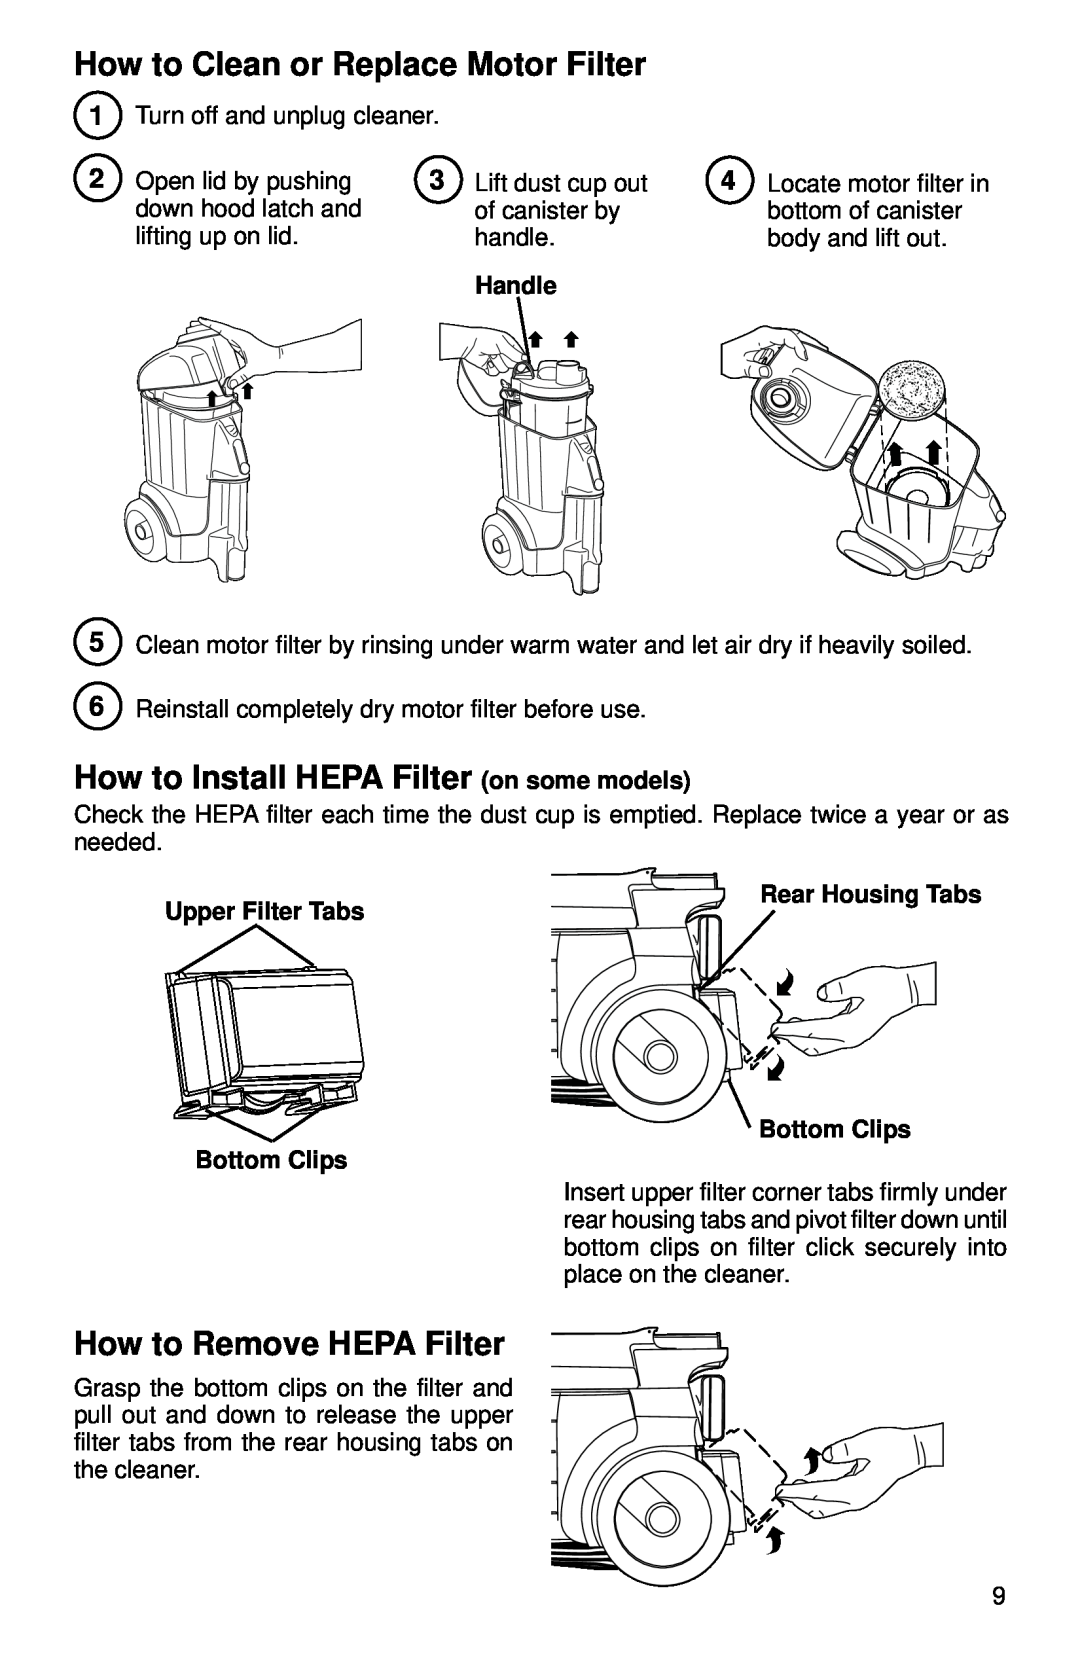 Eureka 3690 How to Clean or Replace Motor Filter, How to Install HEPA Filter on some models, How to Remove HEPA Filter 